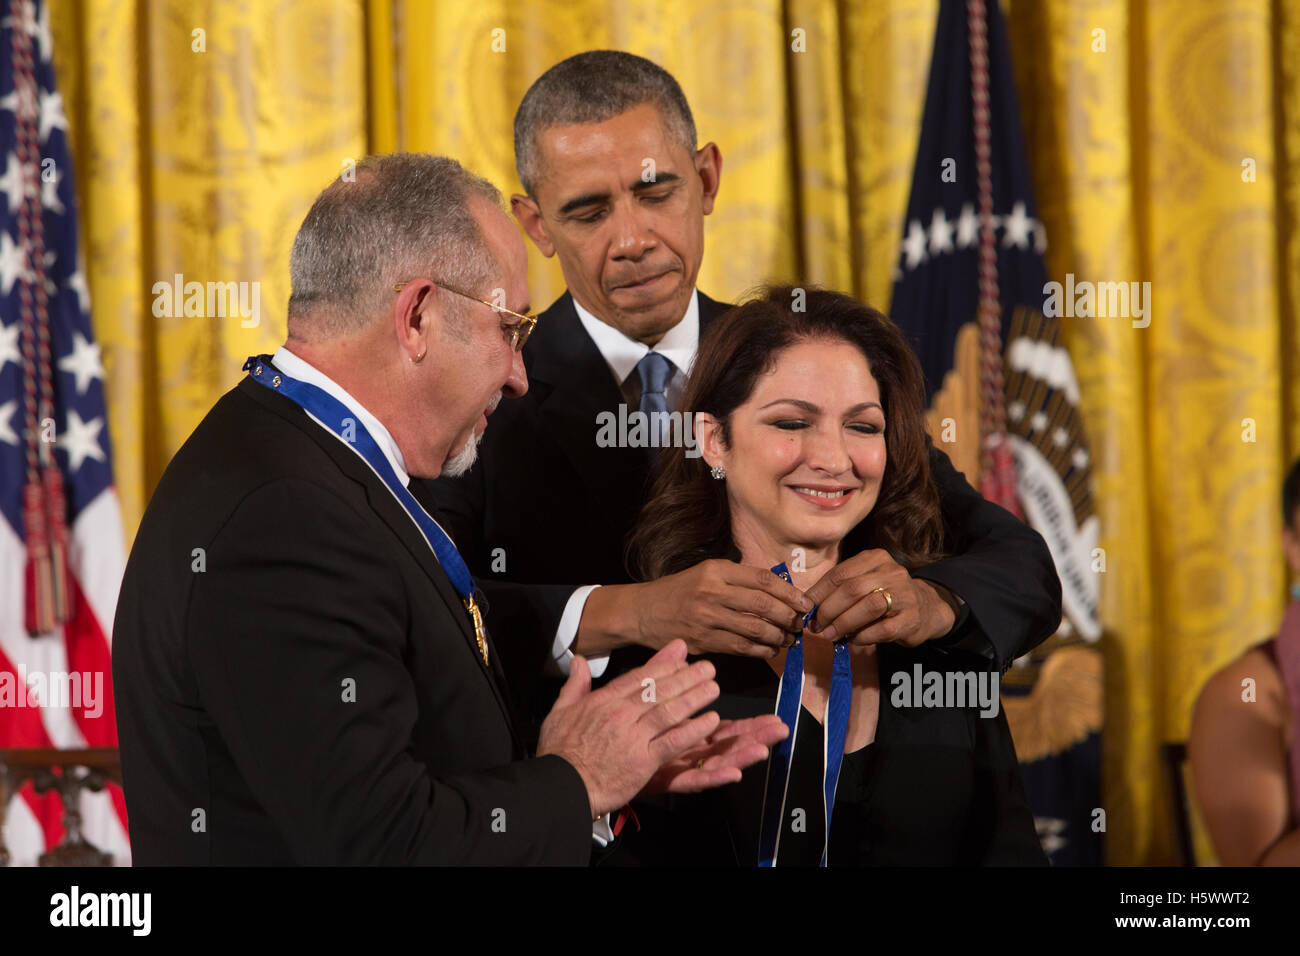 Emilio Estefan and Gloria Estefan receive the Presidential Medal of Freedom Awards from President Obama at the White House in Washinton DC on November 24th, 2015 Stock Photo